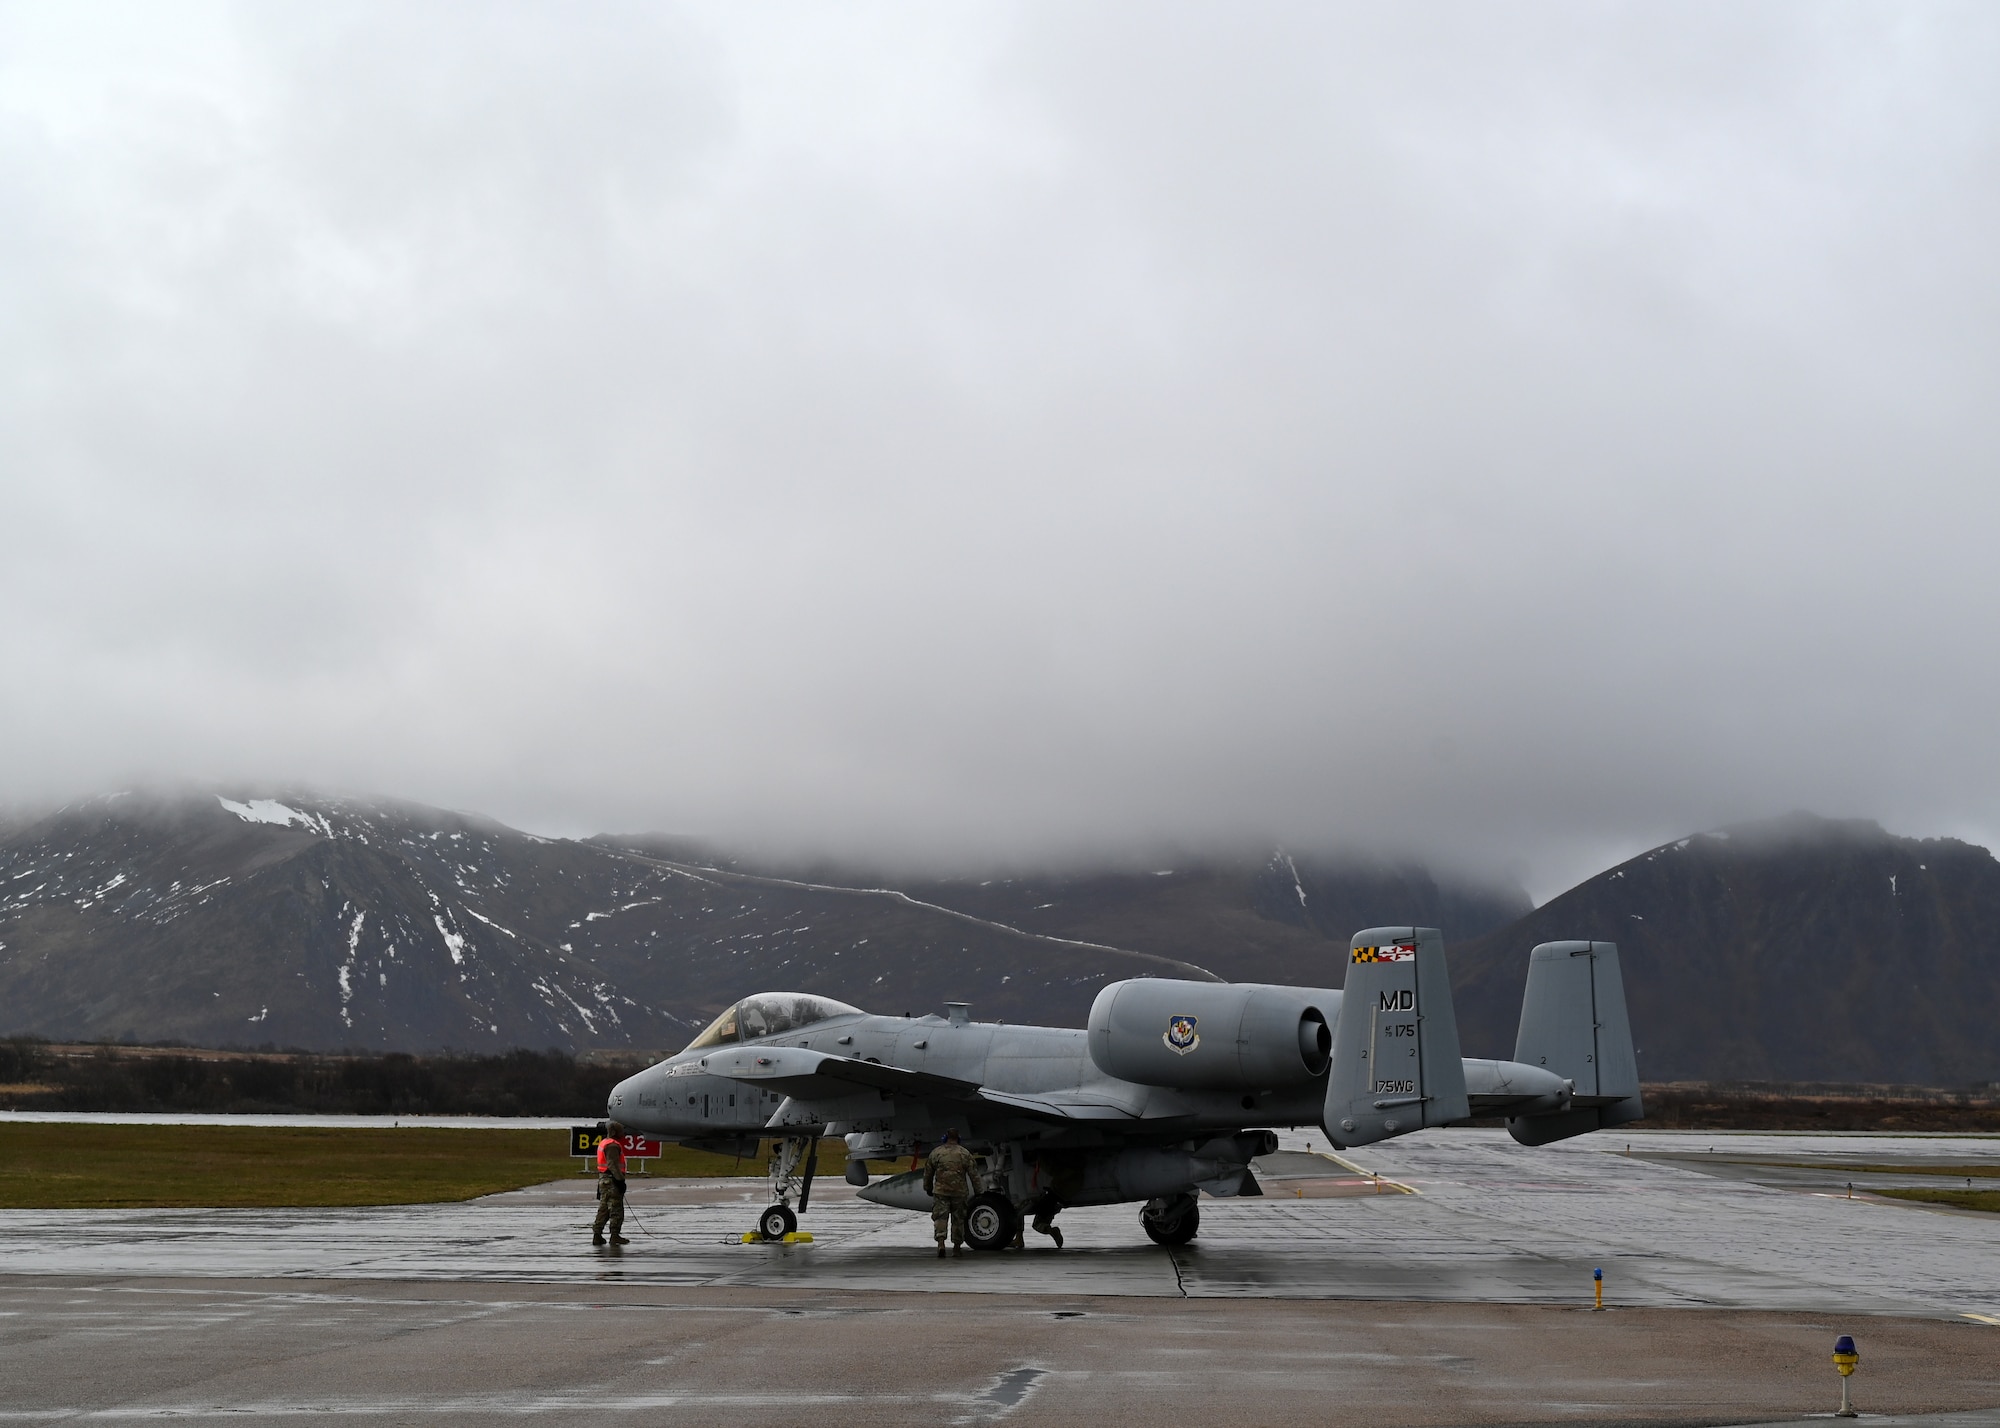 An A-10C Thunderbolt II aircraft assigned to the 104th Fighter Squadron, Maryland Air National Guard, prepares for takeoff from Andoya Air Base, heading to Setermoen Range to participate in the Swift Response exercise, May 12, 2022, in Andenes, Norway.